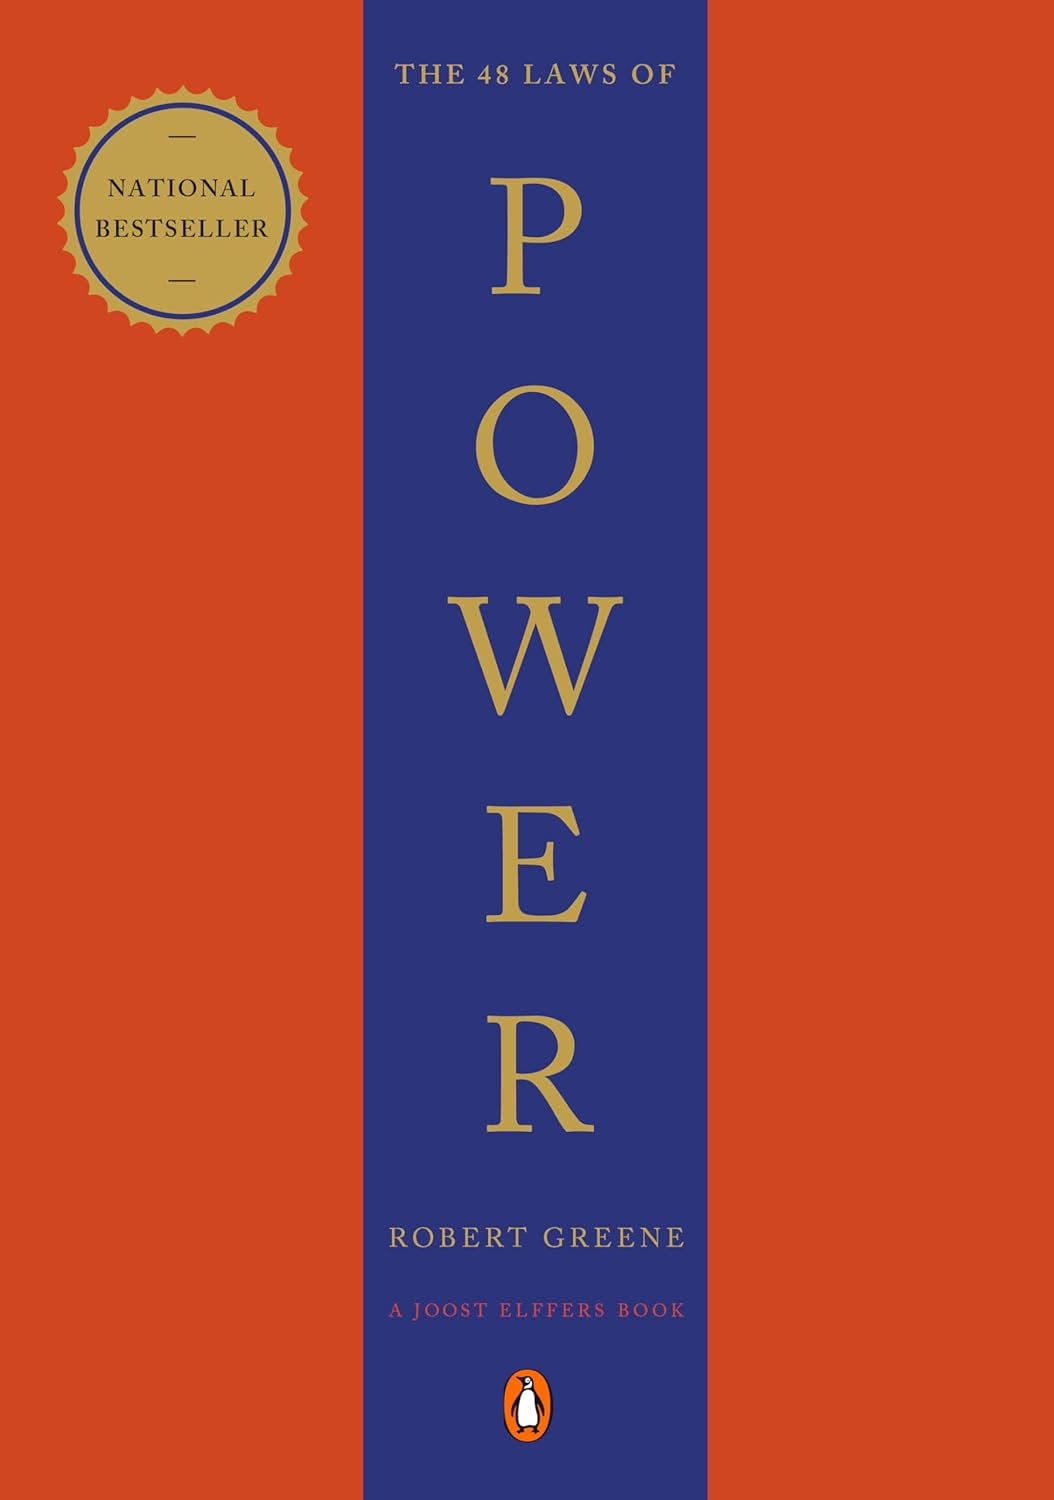 Cracking the Code: Robert Greene’s “The 48 Laws of Power”